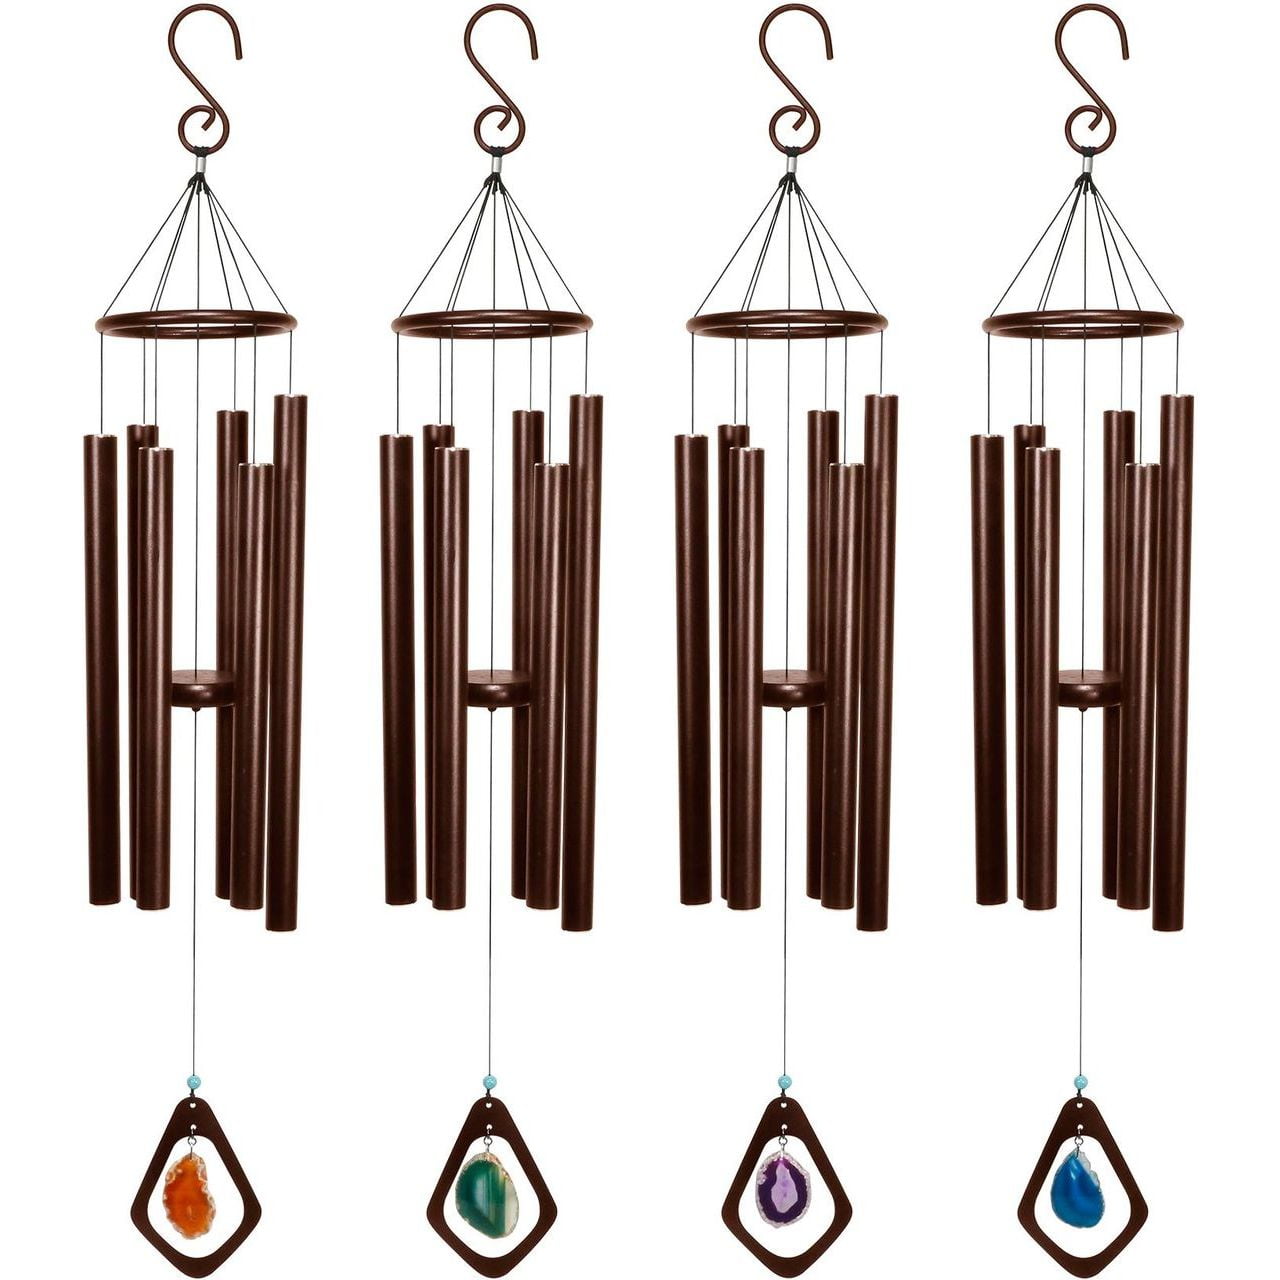 Yoption Wind Chimes Unique Colorful Natural Agate Slices Wind Chimes for Home Garden Decoration Figurine 27-31 inch